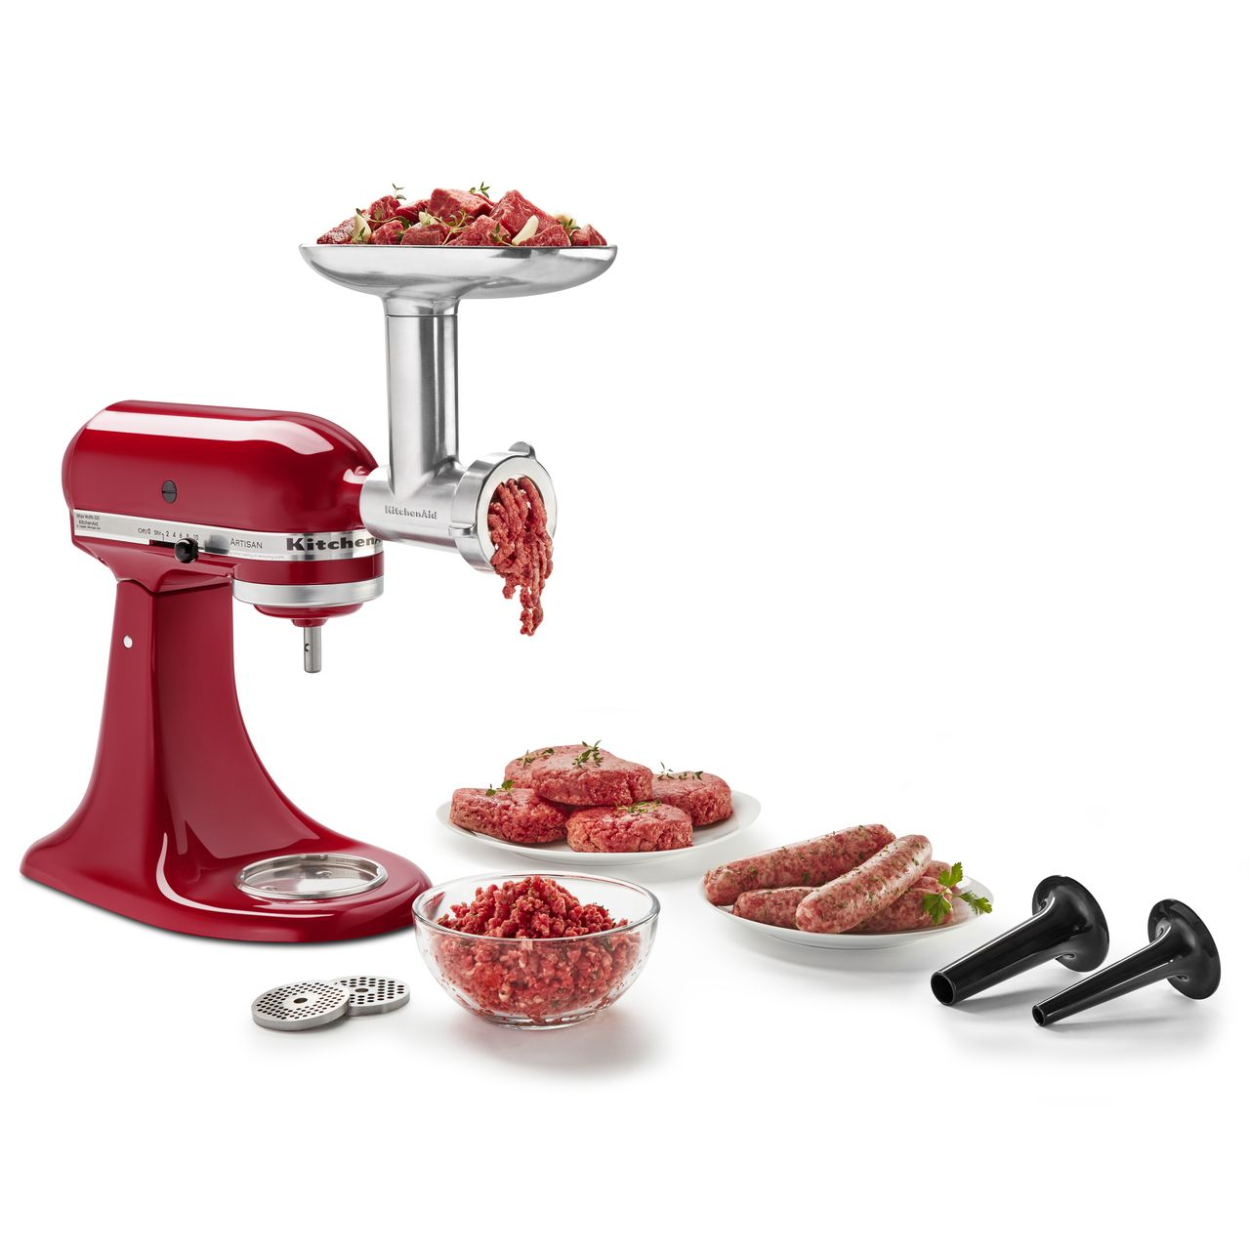 KitchenAid Sifter and Scale Attachment Review - Reviewed